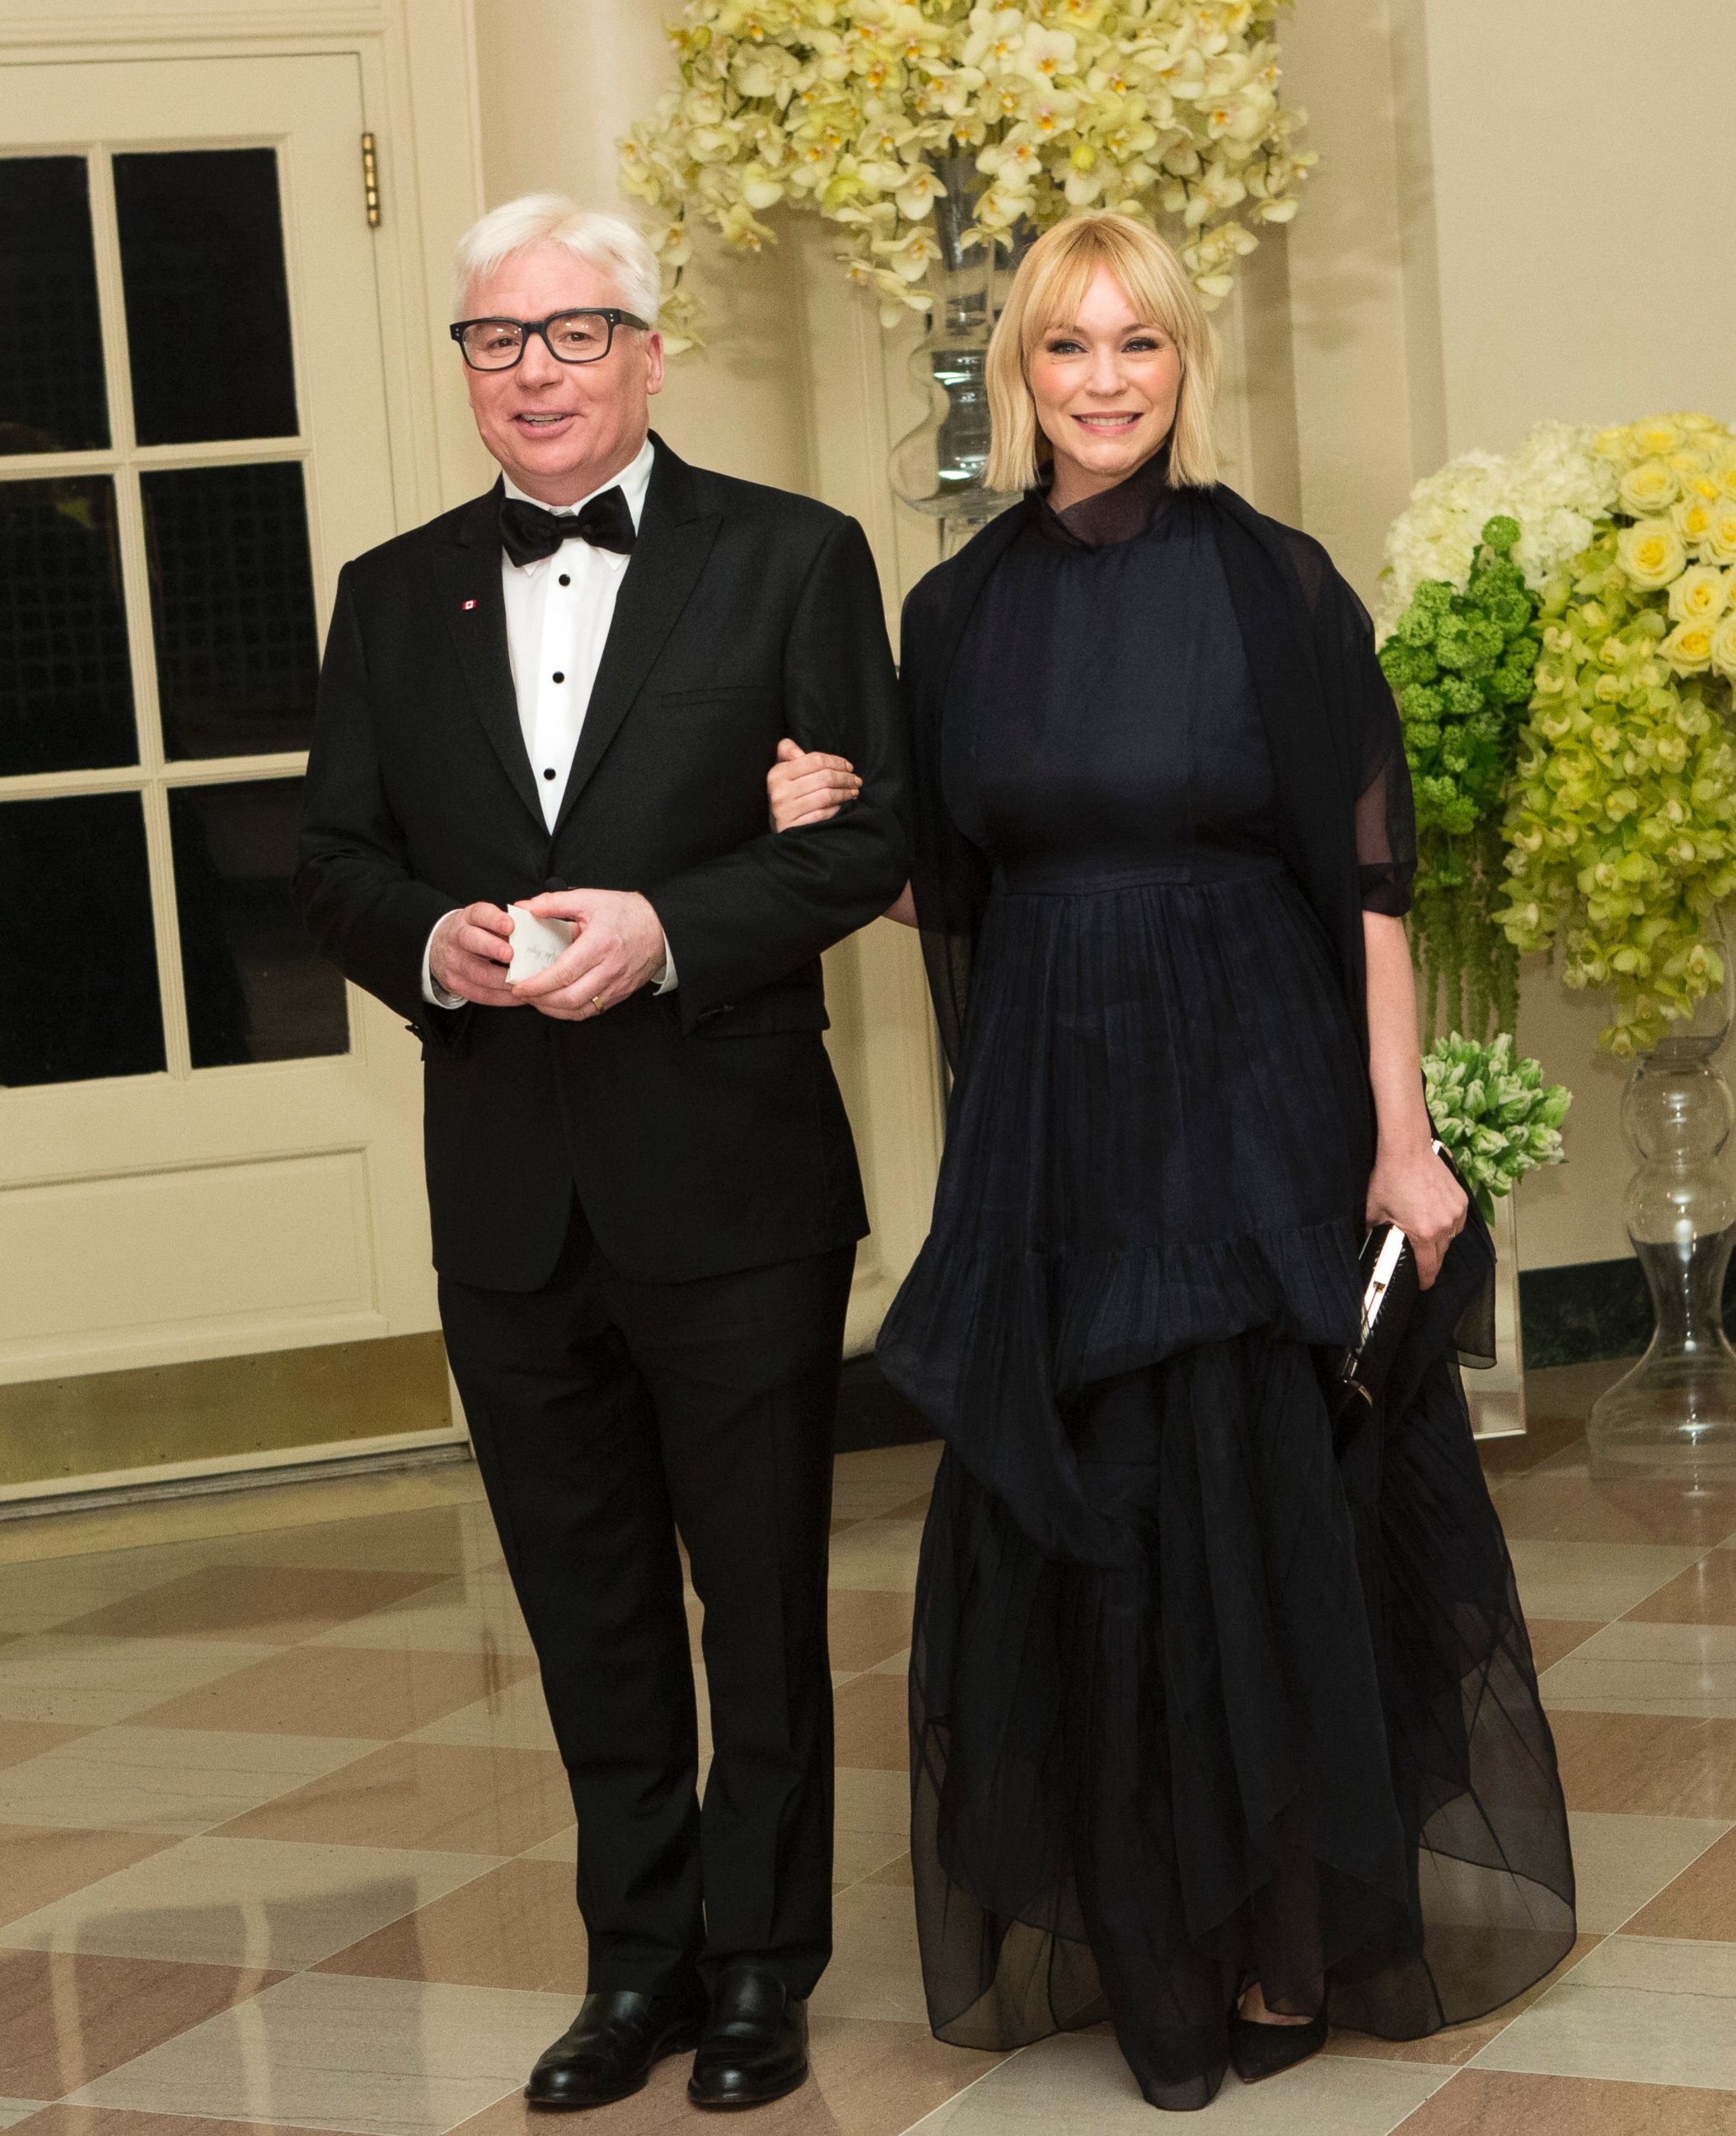 PHOTO: Actor Mike Myers and Kelly Myers arrive at a State Dinner in honor of Canadian Prime Minister Justin Trudeau at the White House in Washington, March 10, 2016.  